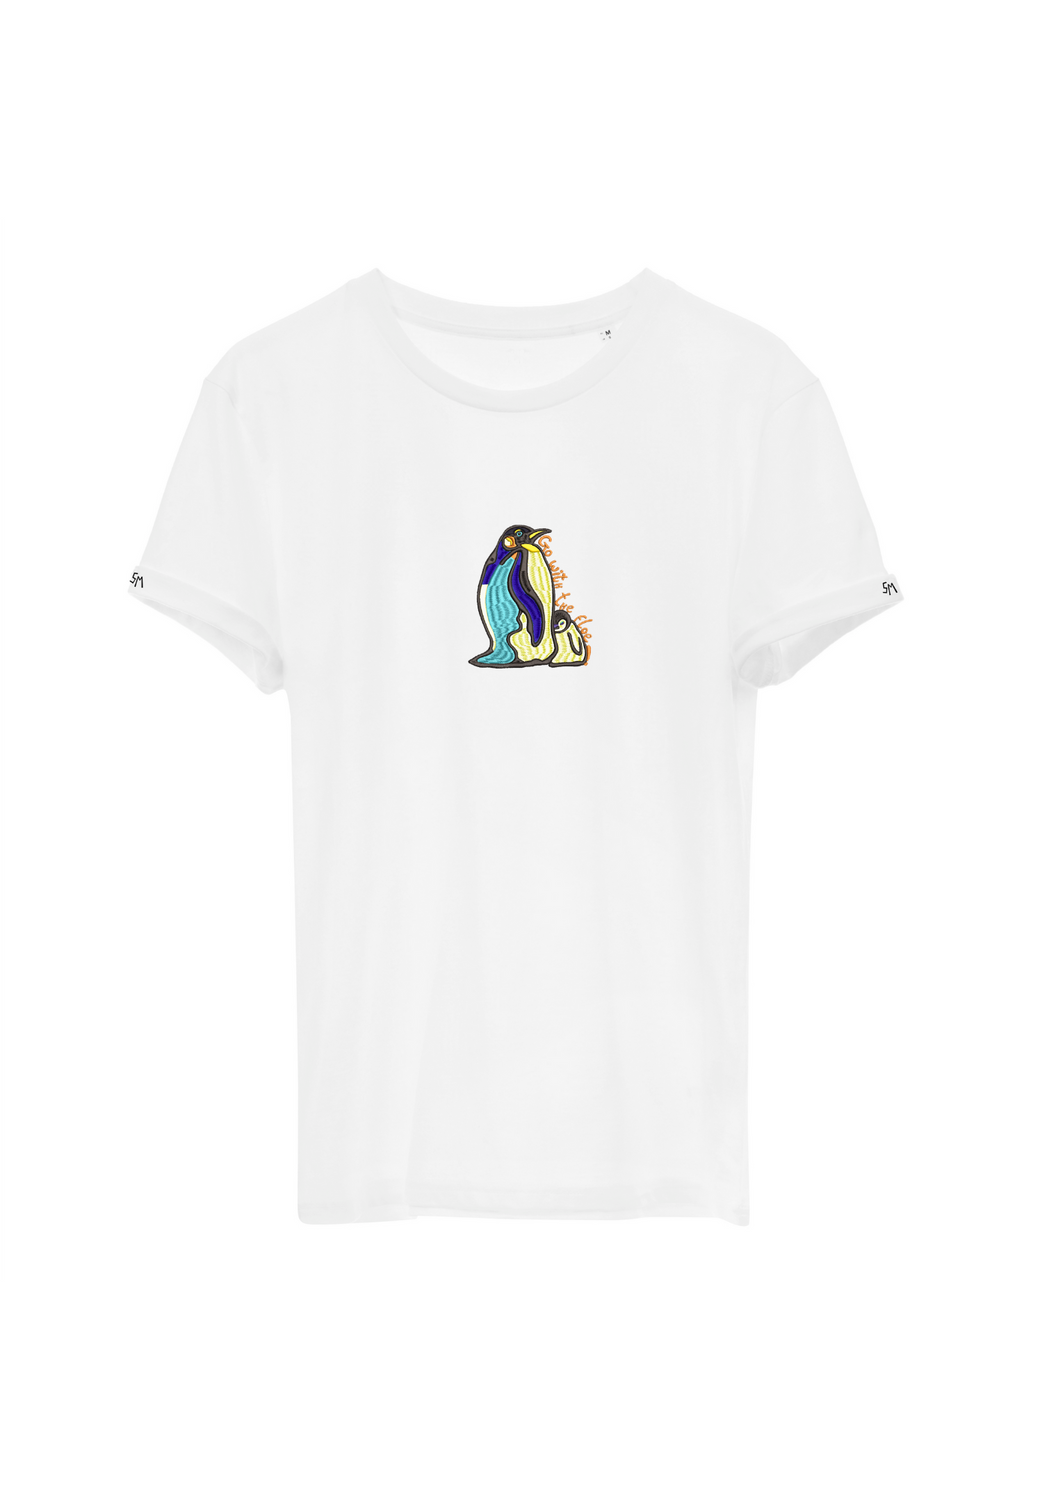 Go with the floe 🐧 organic cotton embroidered unisex T-shirt